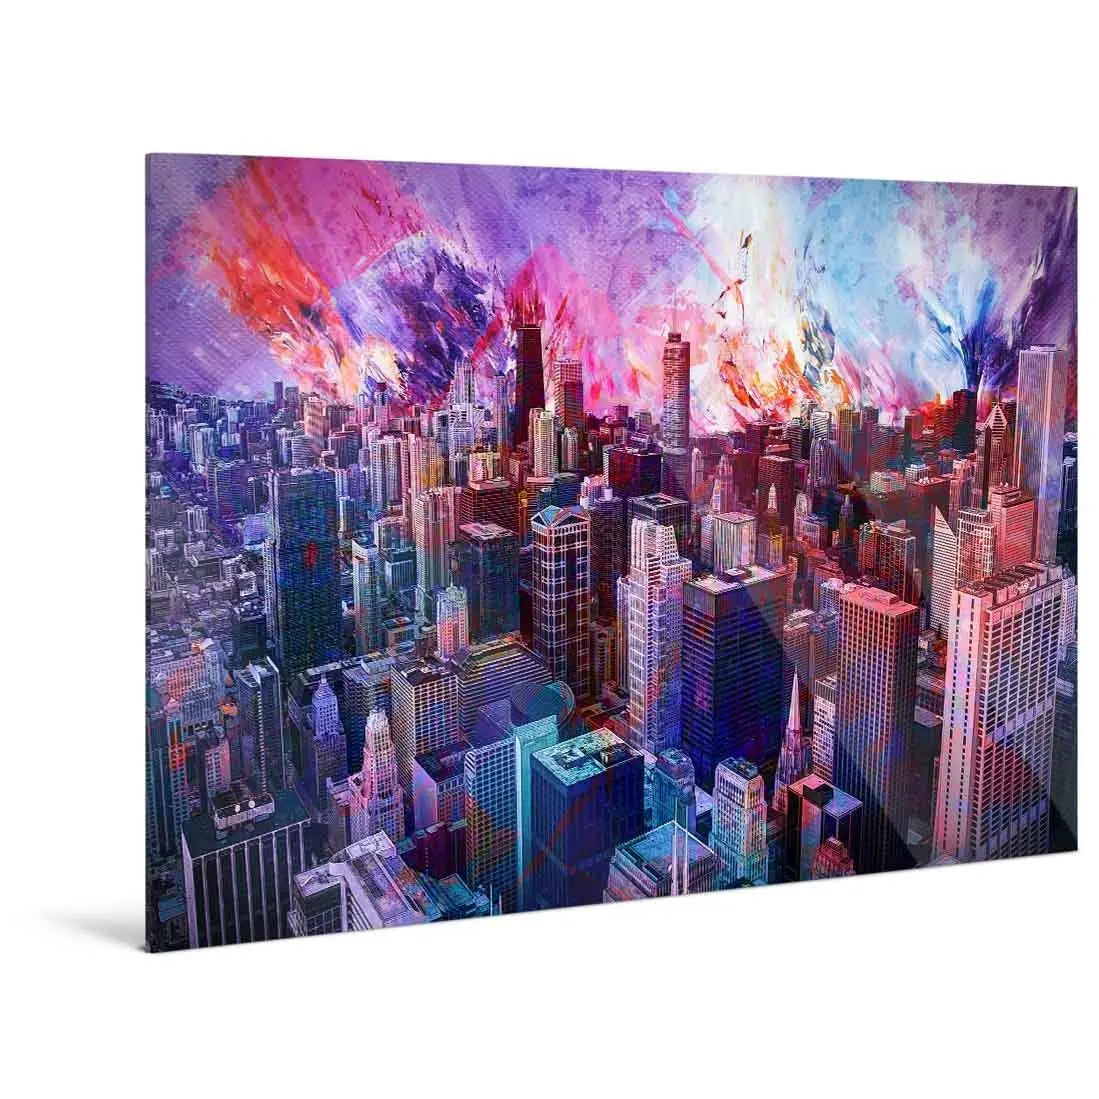 "COLORFUL CITY" - Art For Everyone